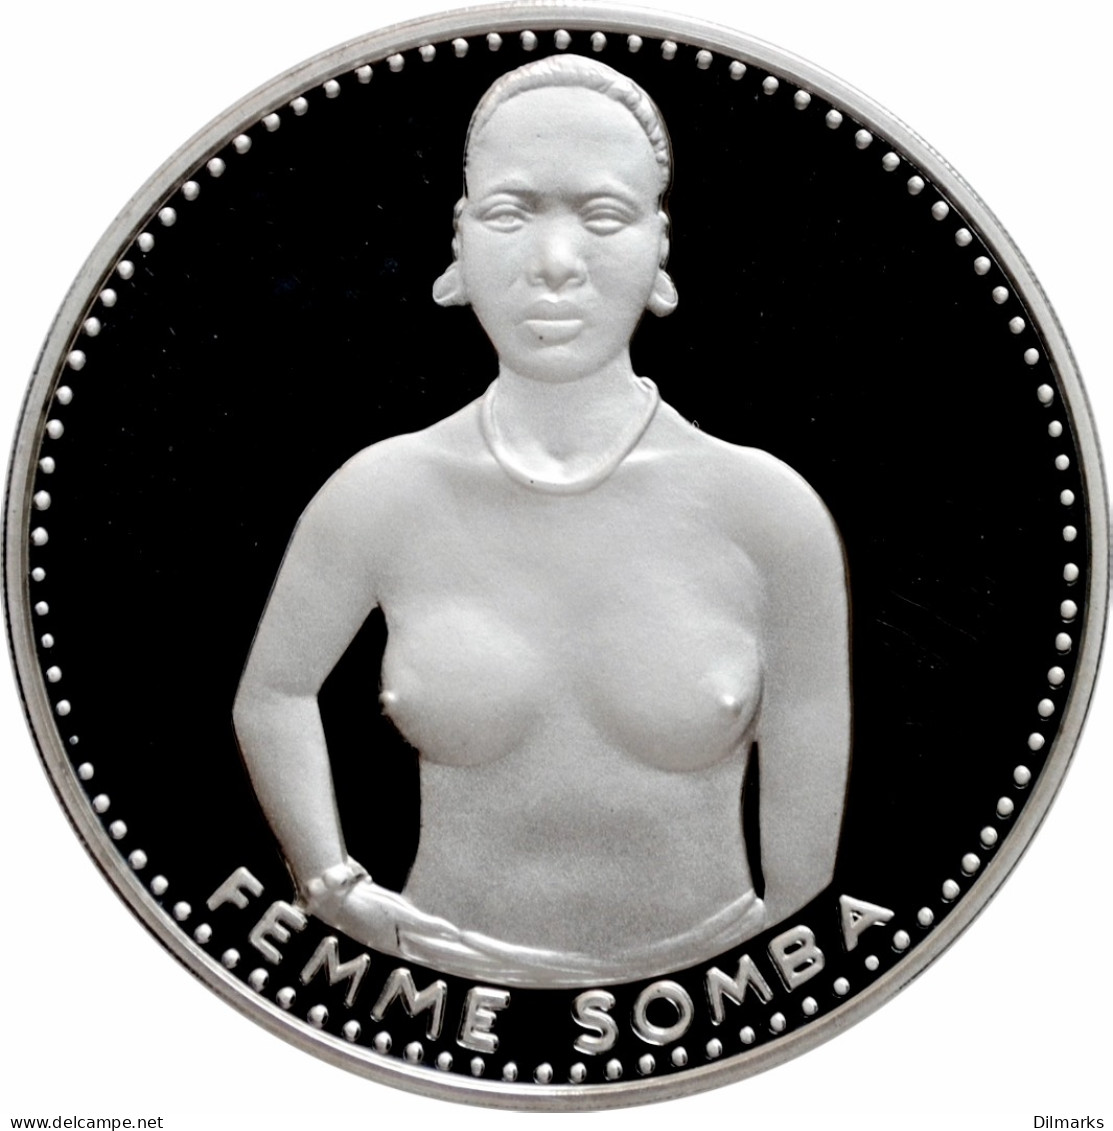 Republic Of Dahomey (Benin) 1000 Francs 1971, NGC PF66 UC, &quot;Somba Woman&quot; - Other - Africa